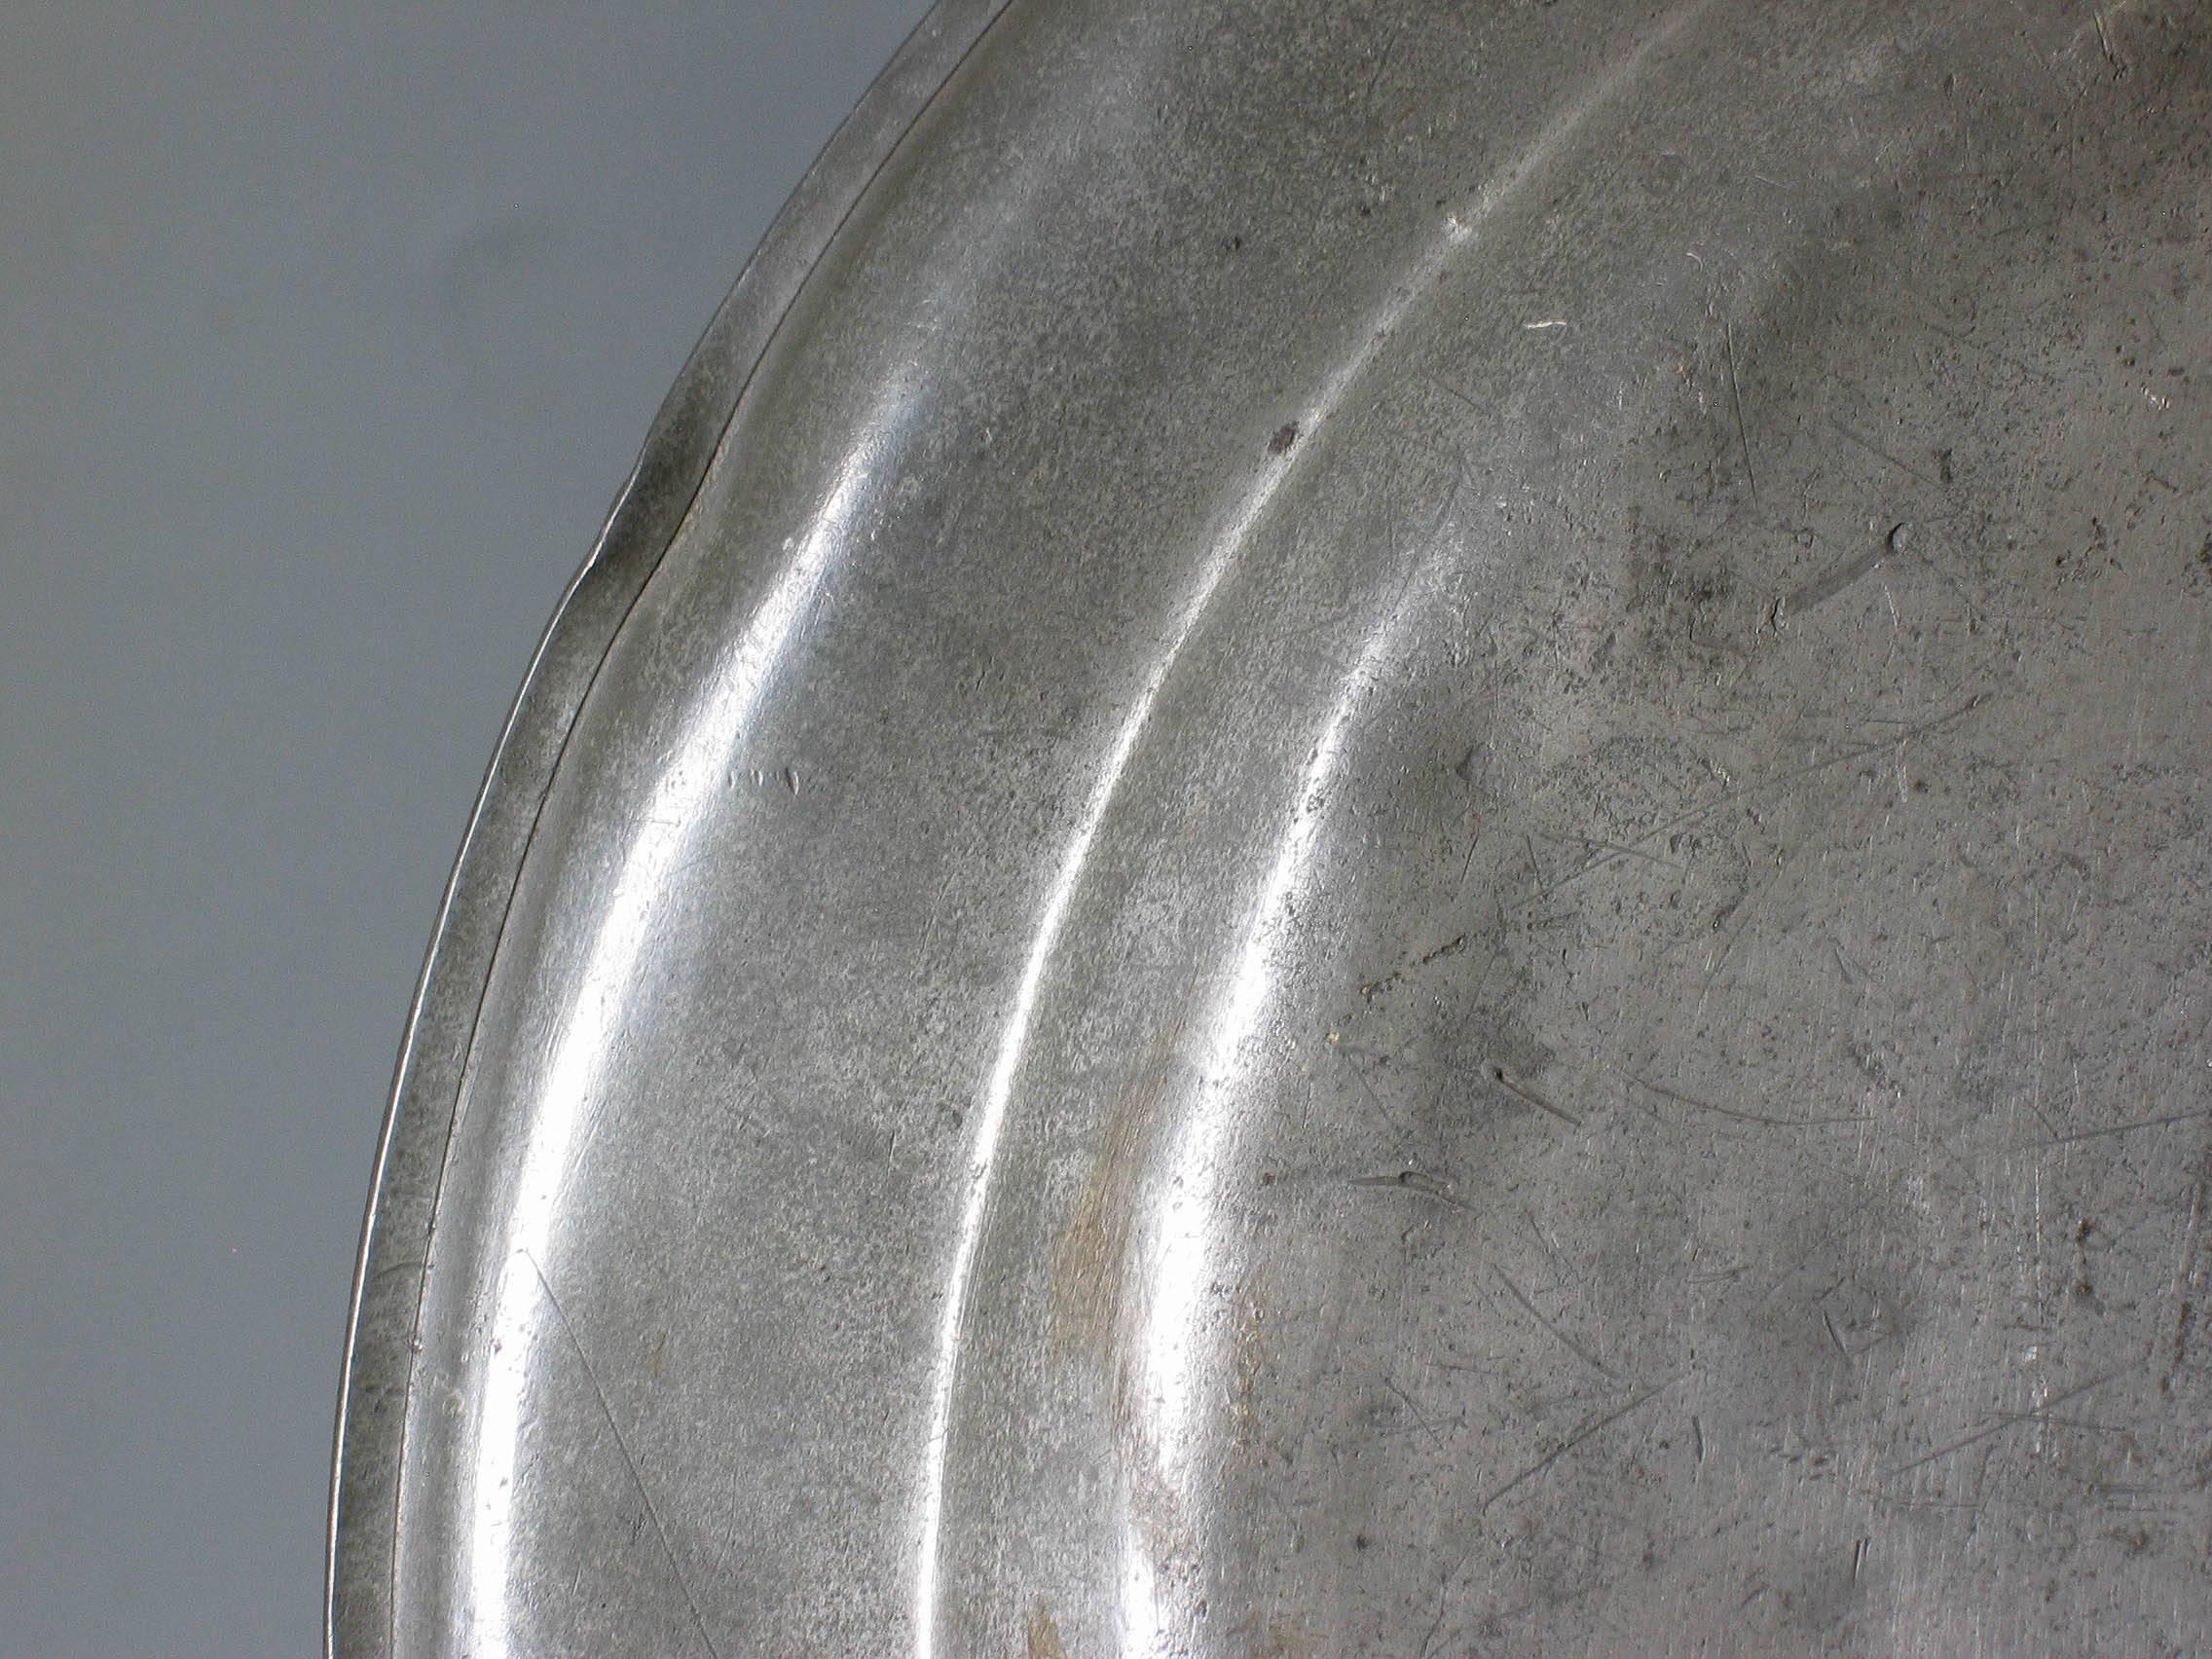 English Export Pewter Dish and Plate by Townsend & Compton of London, 1784-1802